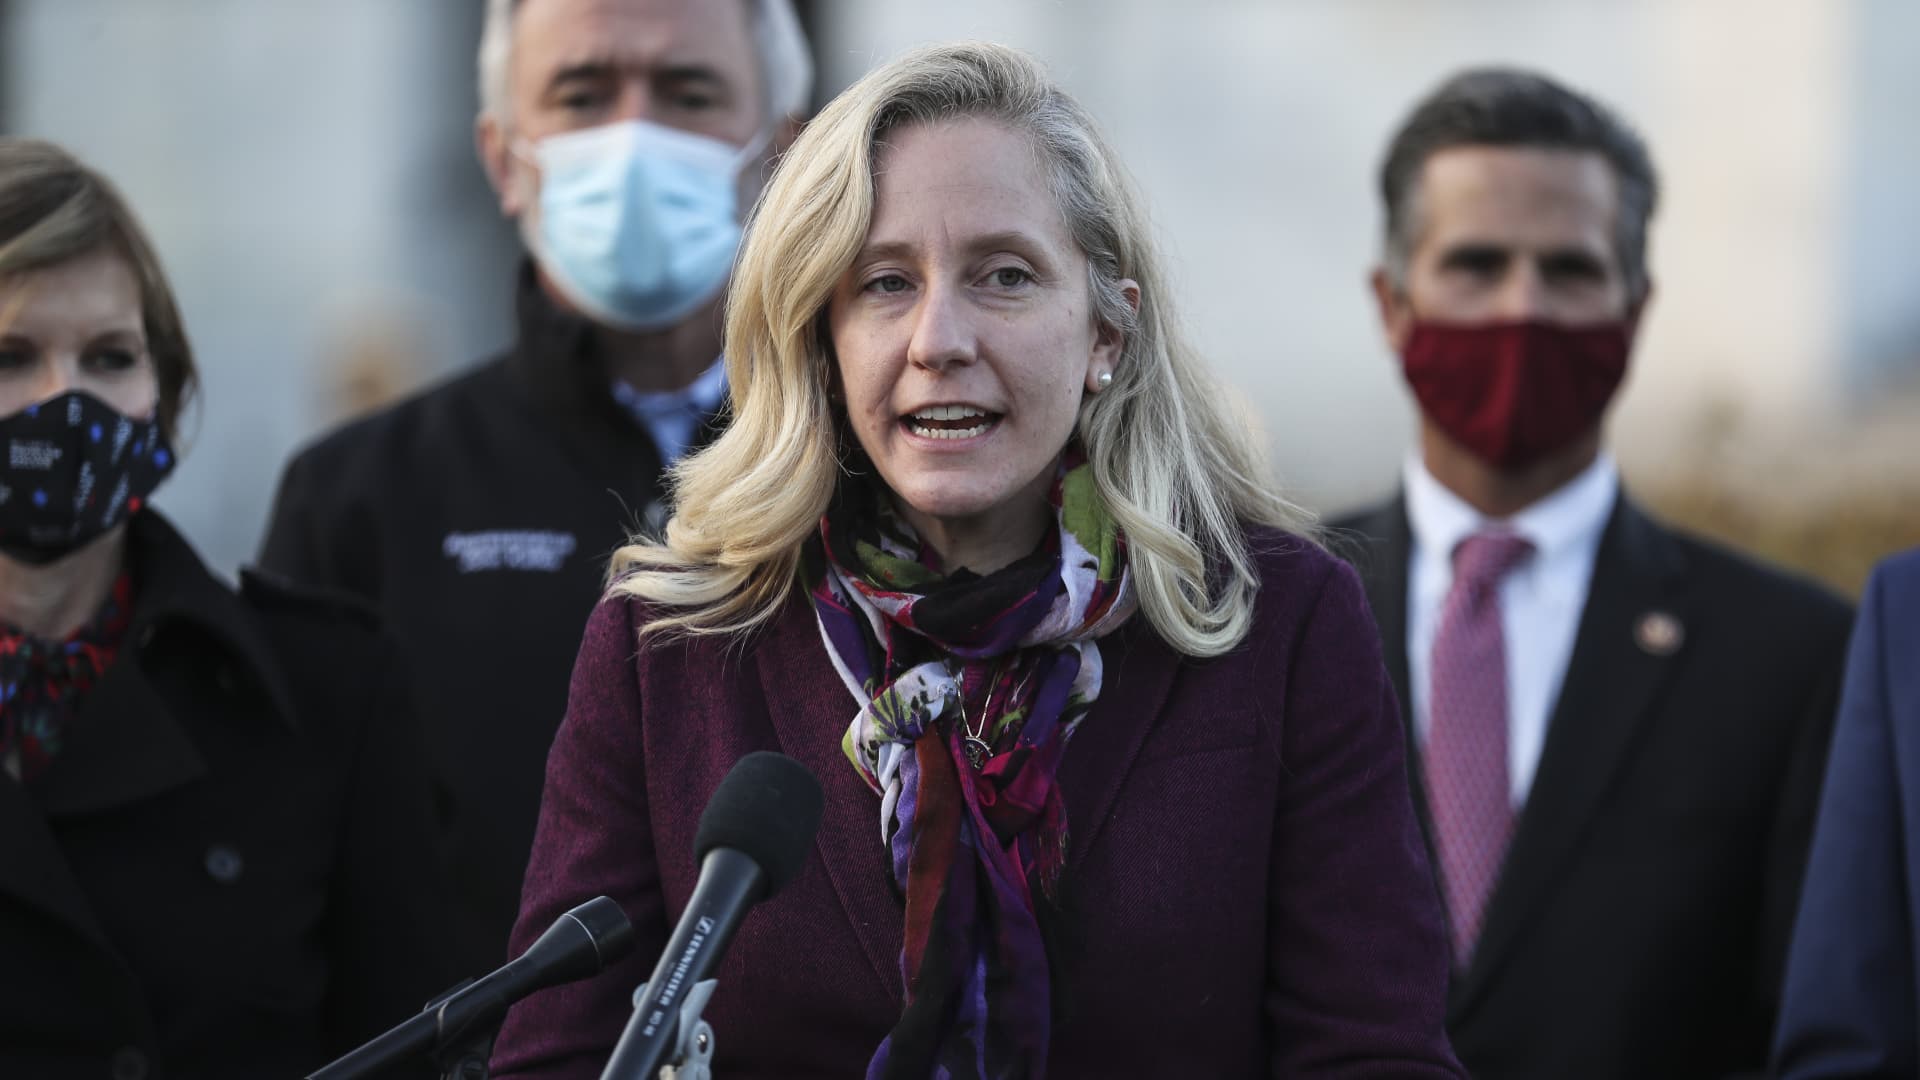 Representative Abigail Spanberger, a Democrat from Virginia, speaks during a news conference with members of the Problem Solvers Caucus at the U.S. Capitol in Washington, D.C., U.S., on Monday, Dec. 21, 2020.